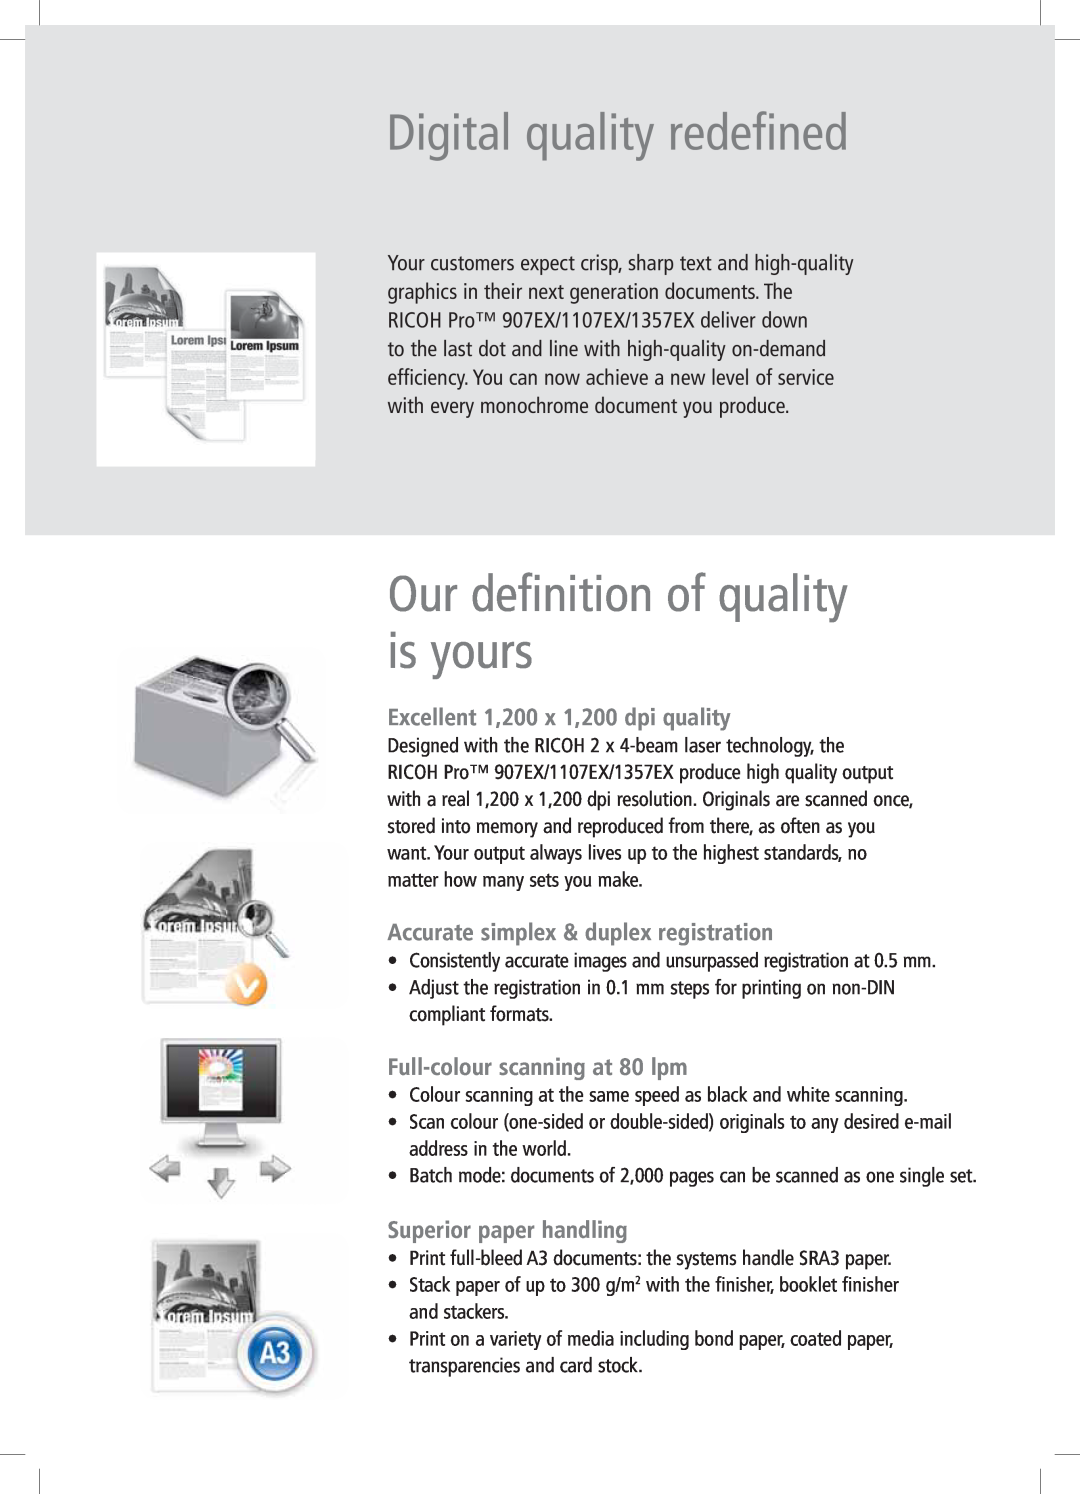 Ricoh 907EX, 1107EX Digital quality redefined, Our definition of quality is yours, Excellent 1,200 x 1,200 dpi quality 